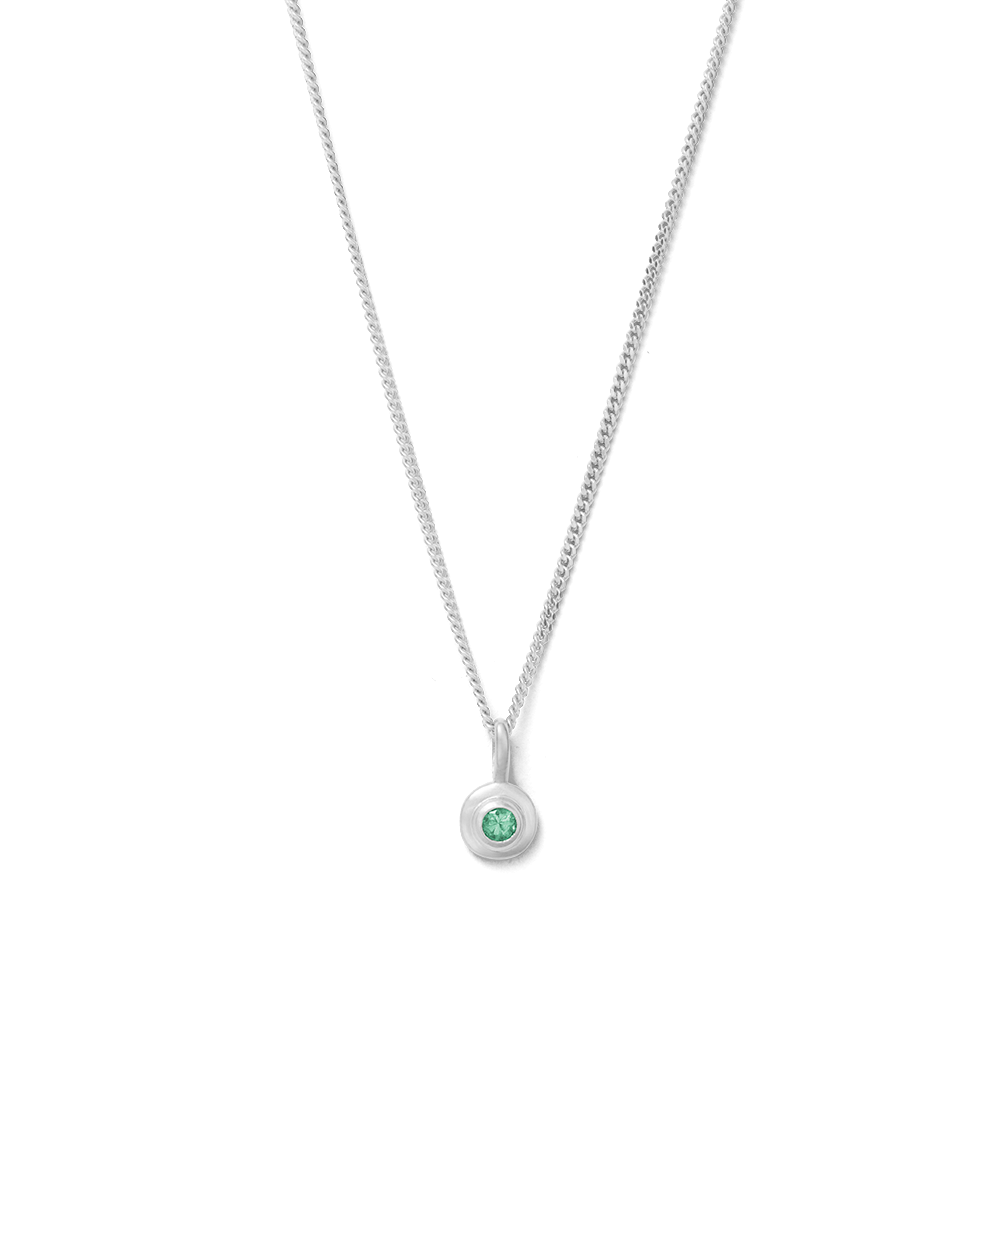 Family Birthstone Necklace - Talisa - Women's Sterling Silver Necklace